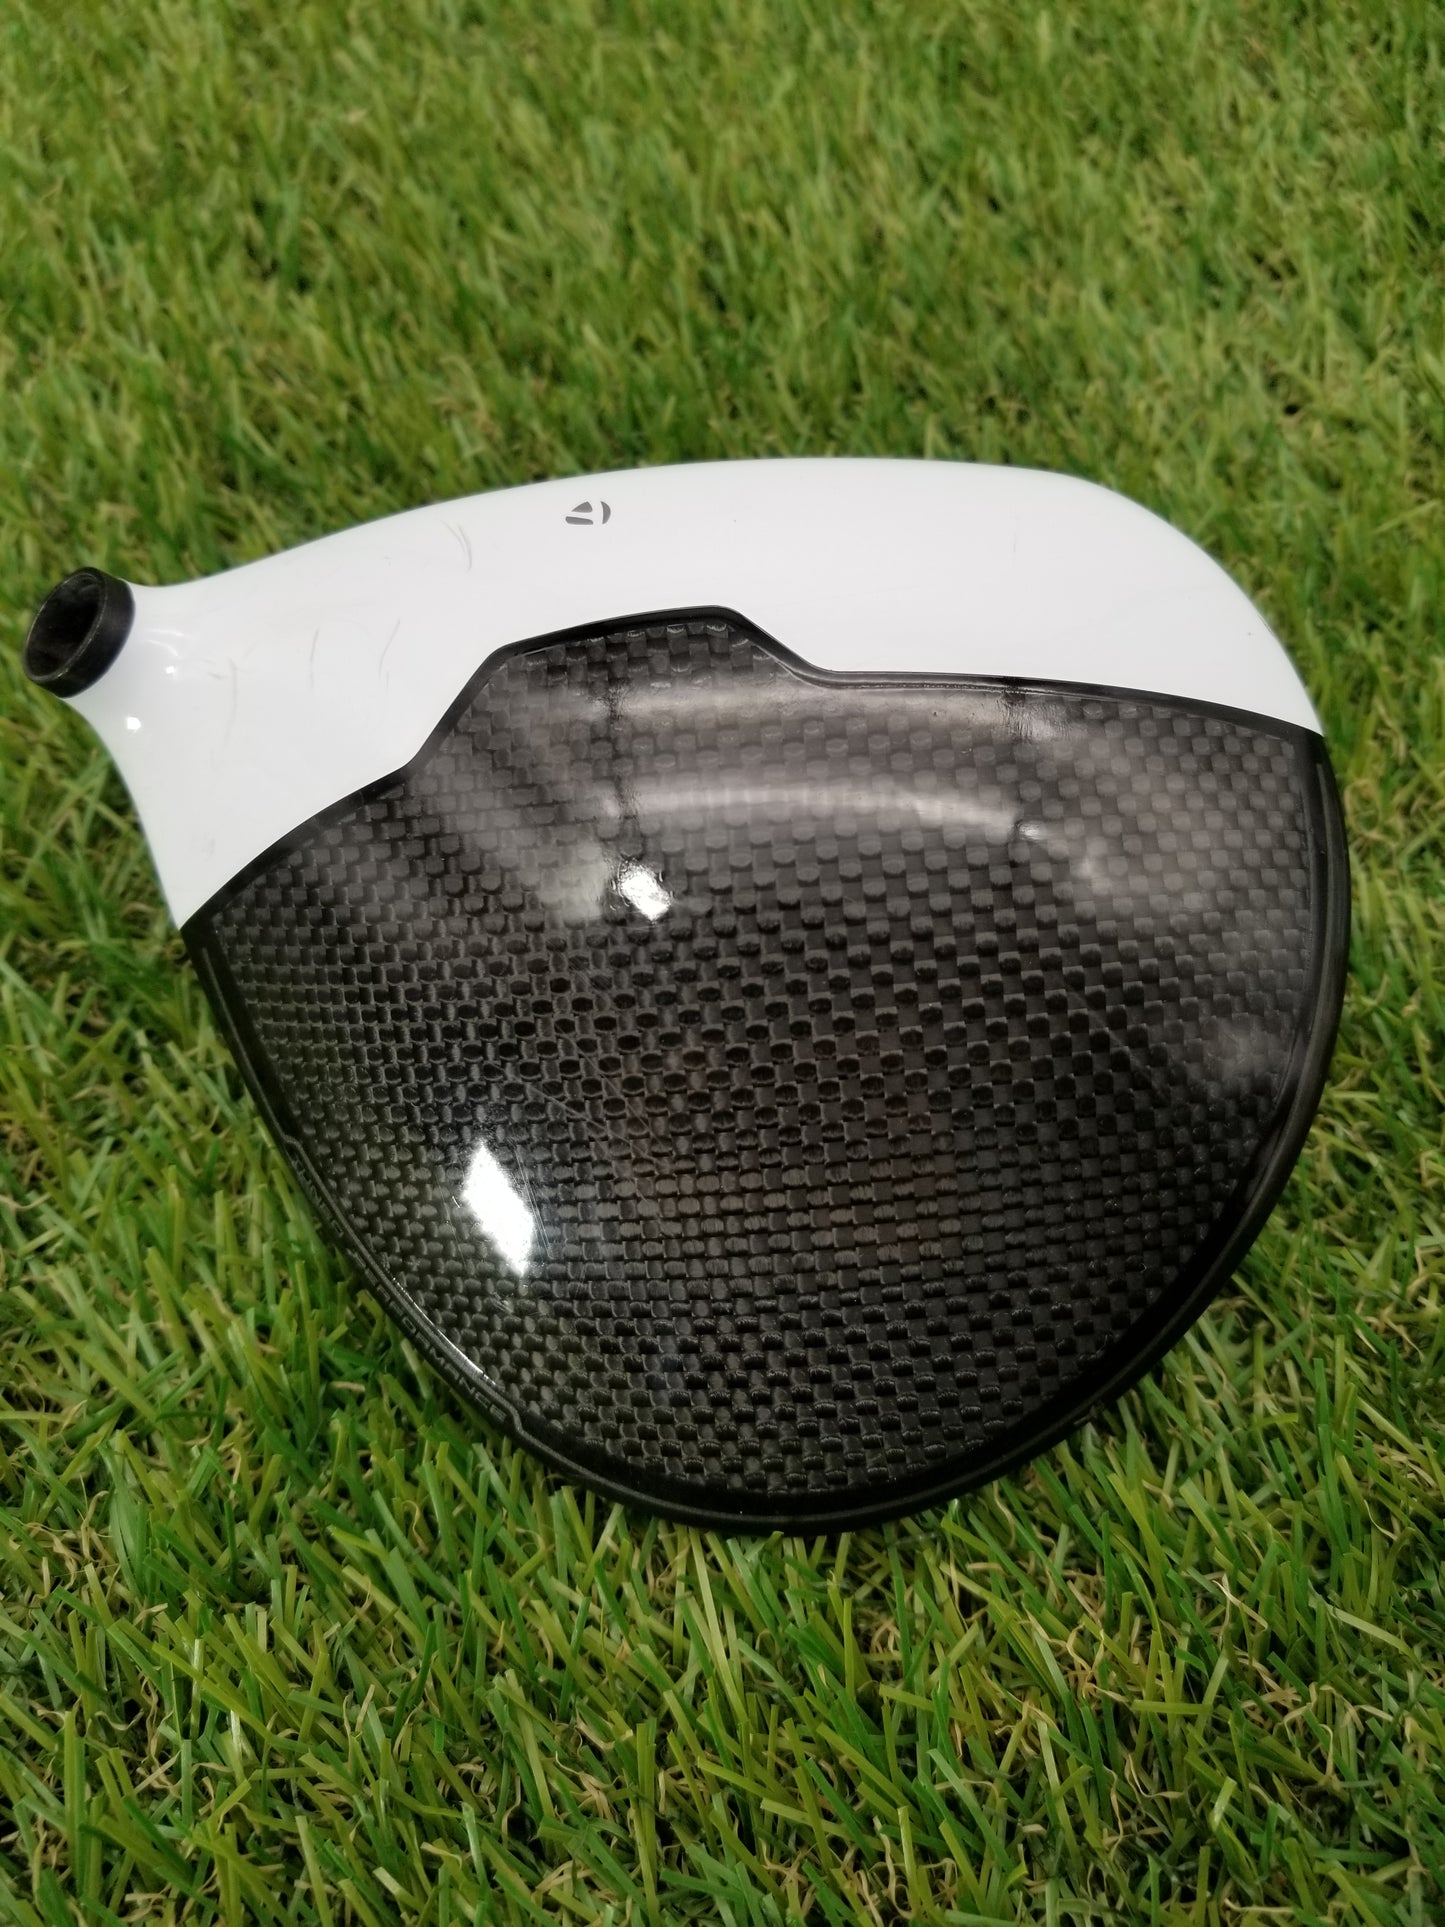 TOUR CERTIFIED 2016 TAYLORMADE M1 460 DRIVER 8.5* CLUBHEAD ONLY VERYGOOD